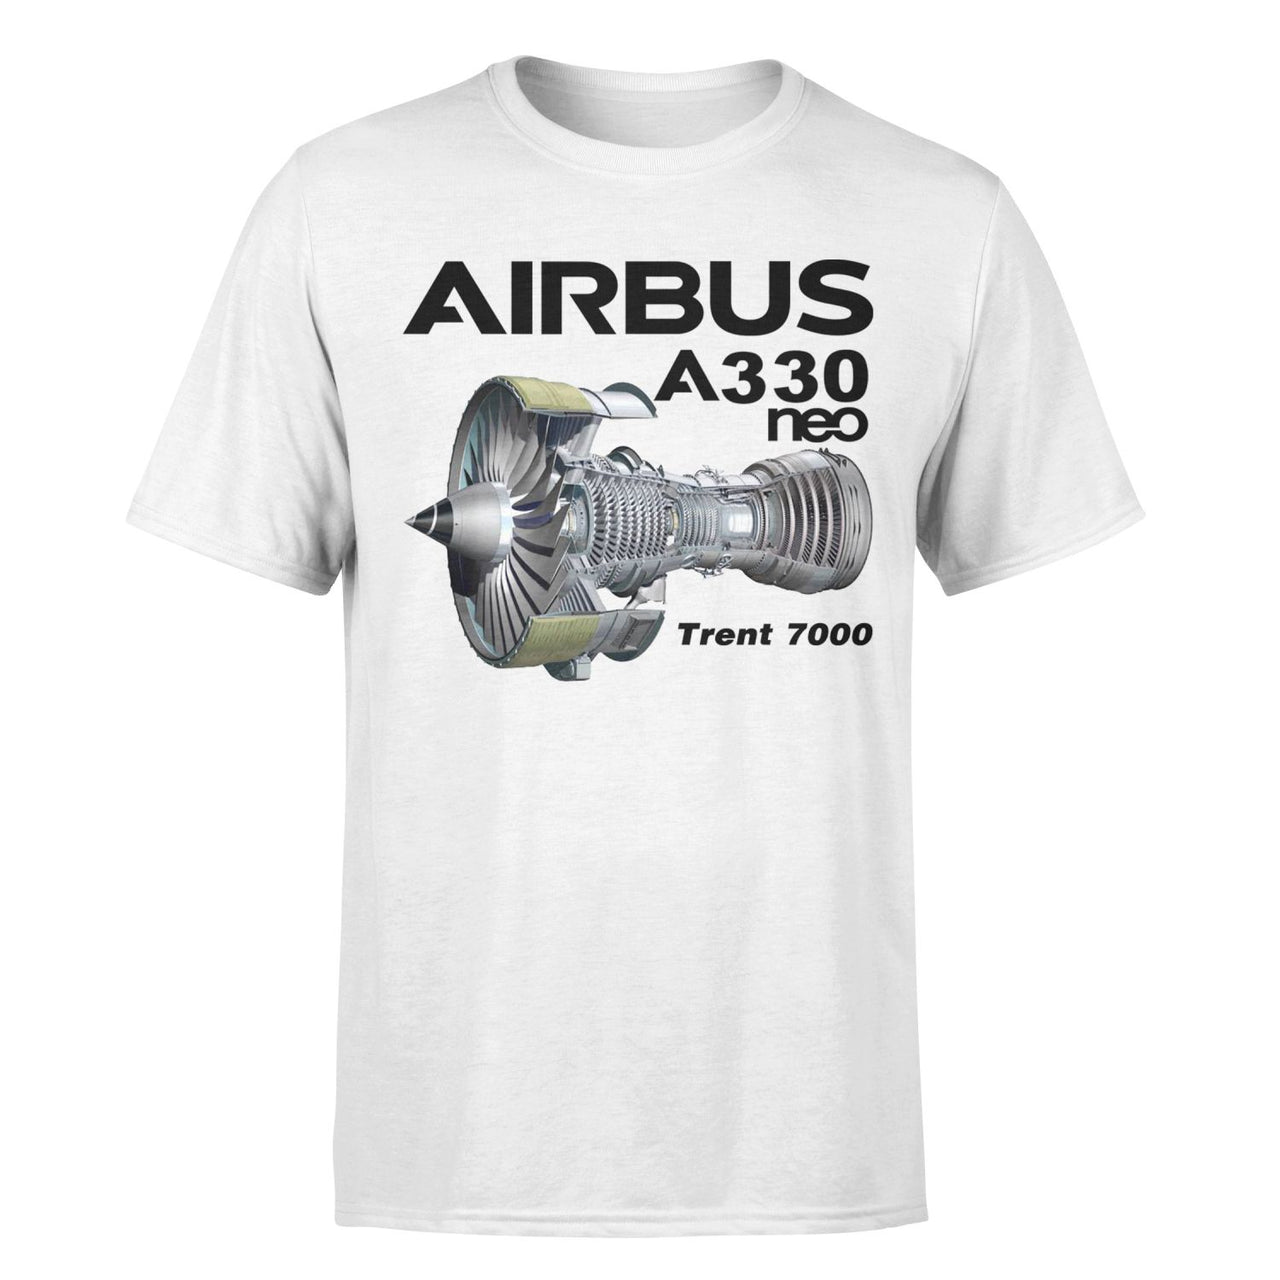 Airbus A330neo & Trent 7000 Designed T-Shirts